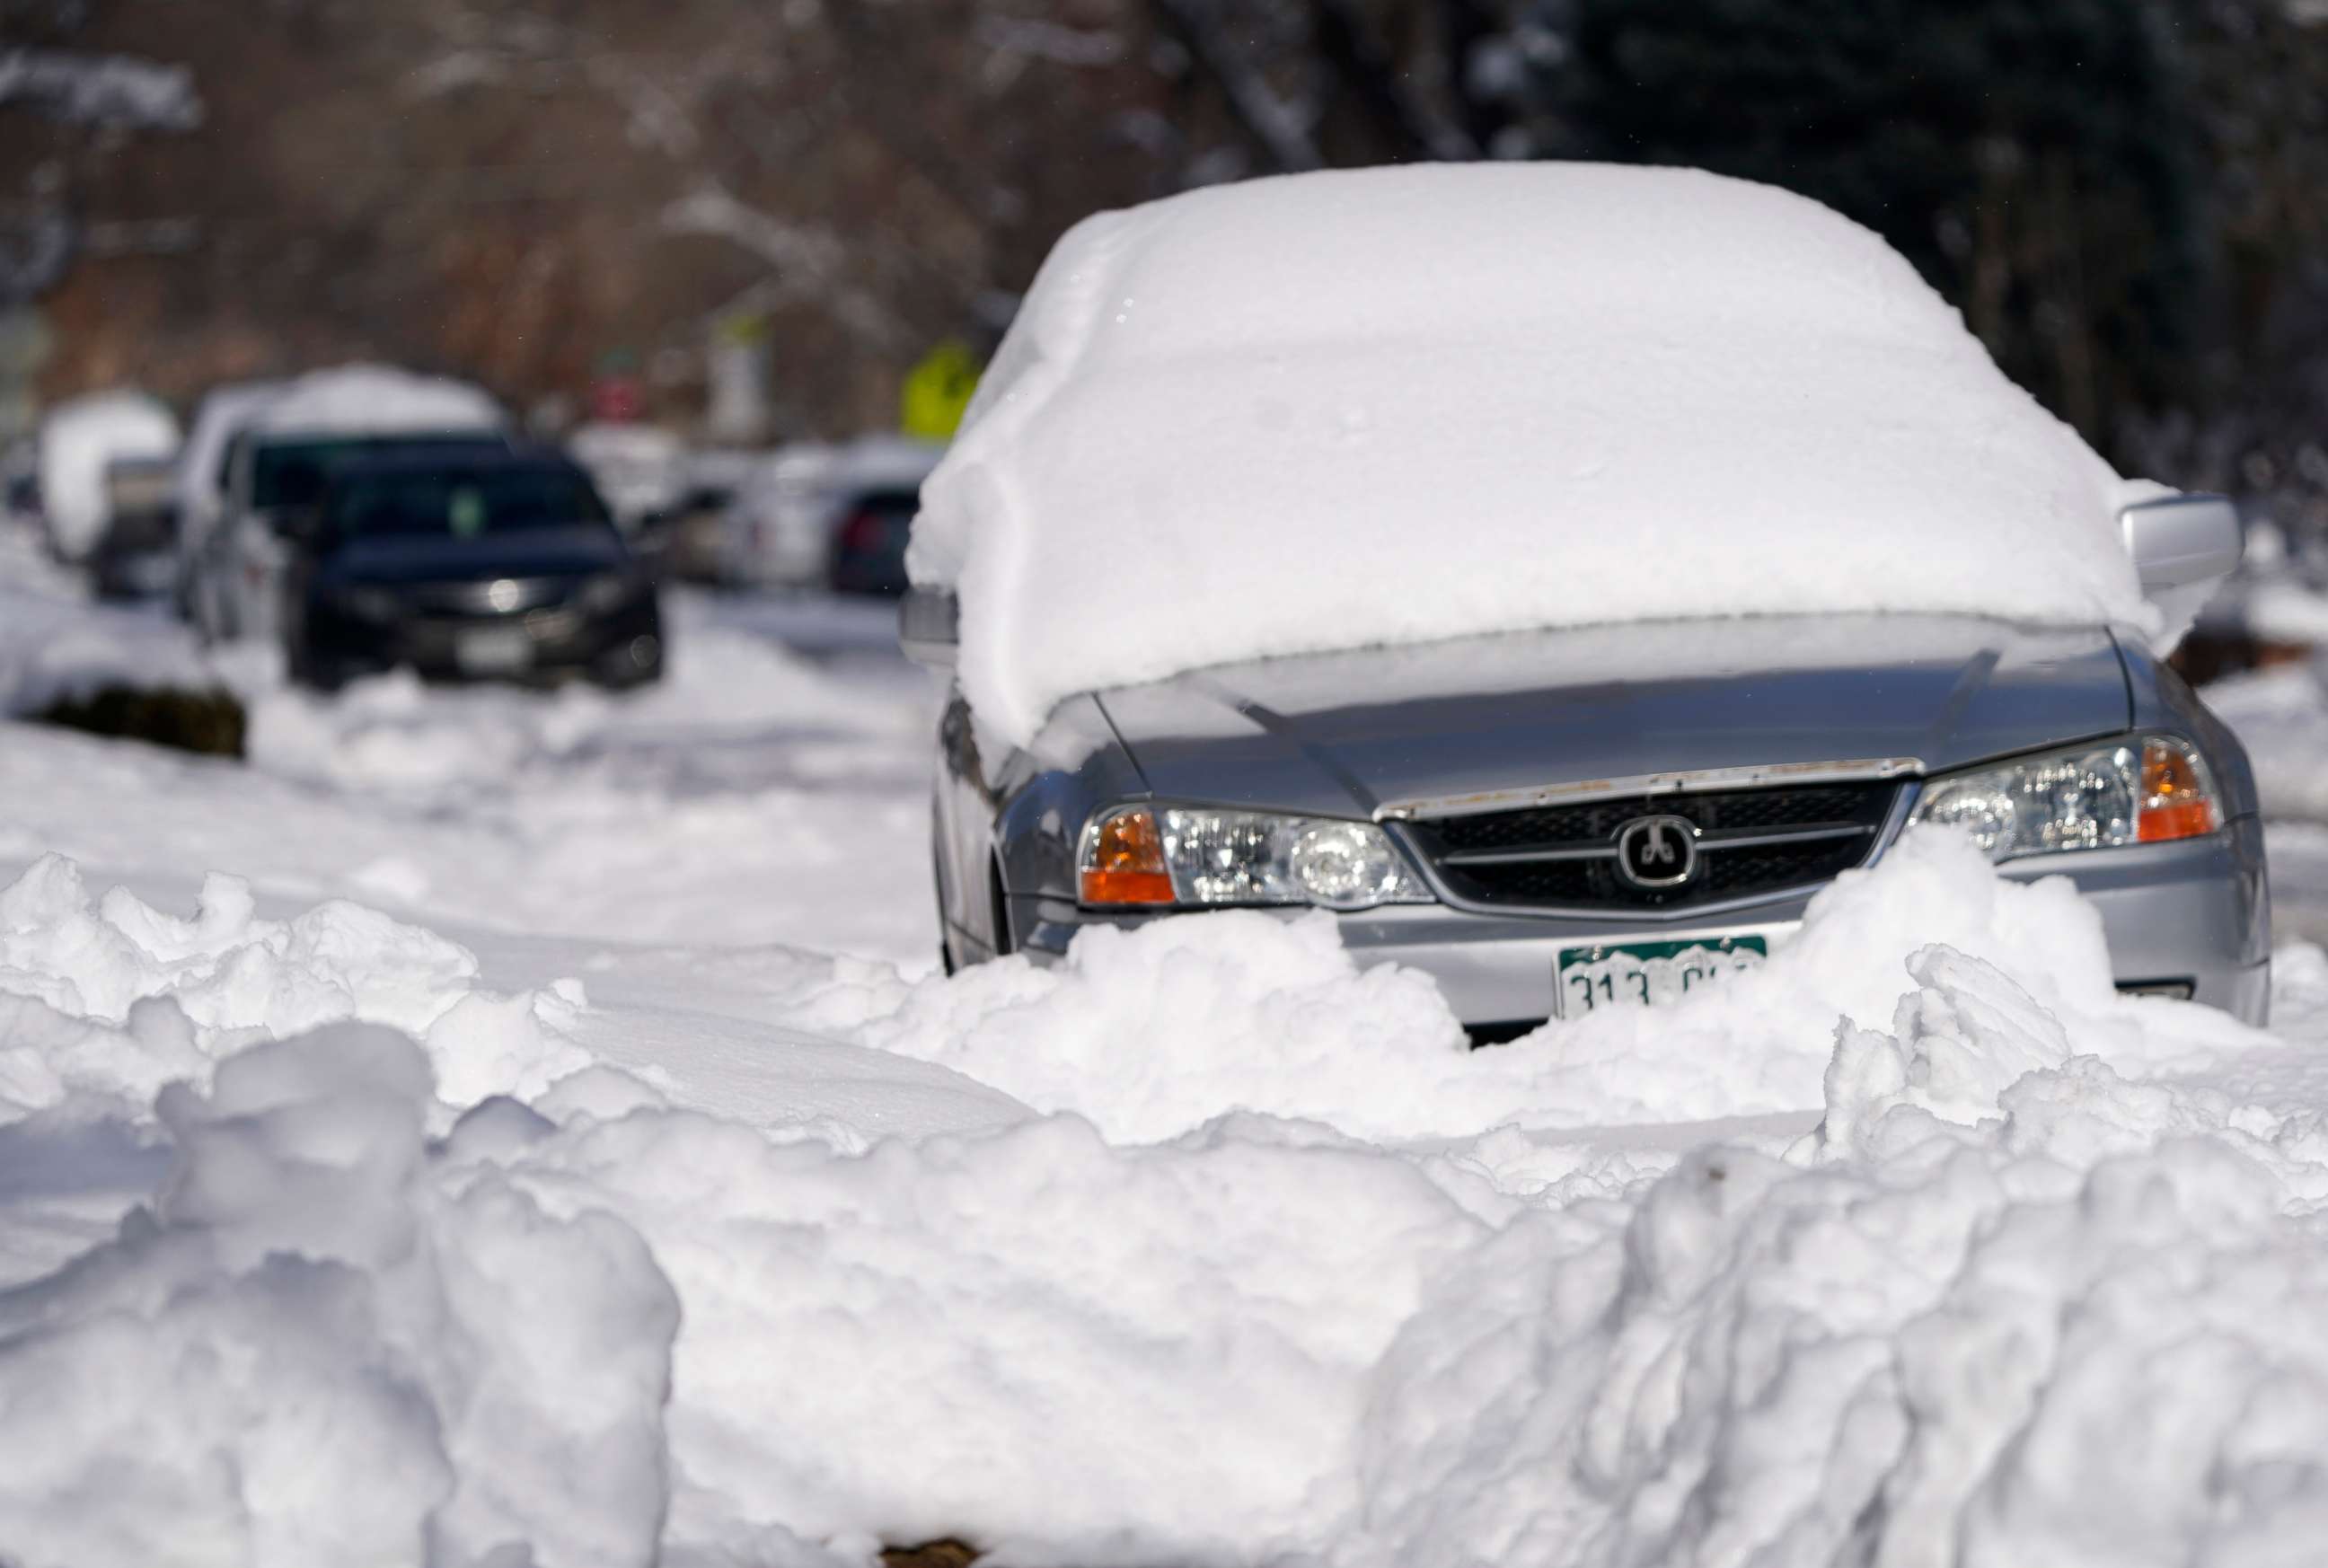 PHOTO: A sedan is buried after more than a foot of snow left by a late winter storm that swept over the region on Feb. 25, 2021, in Denver, Colorado.